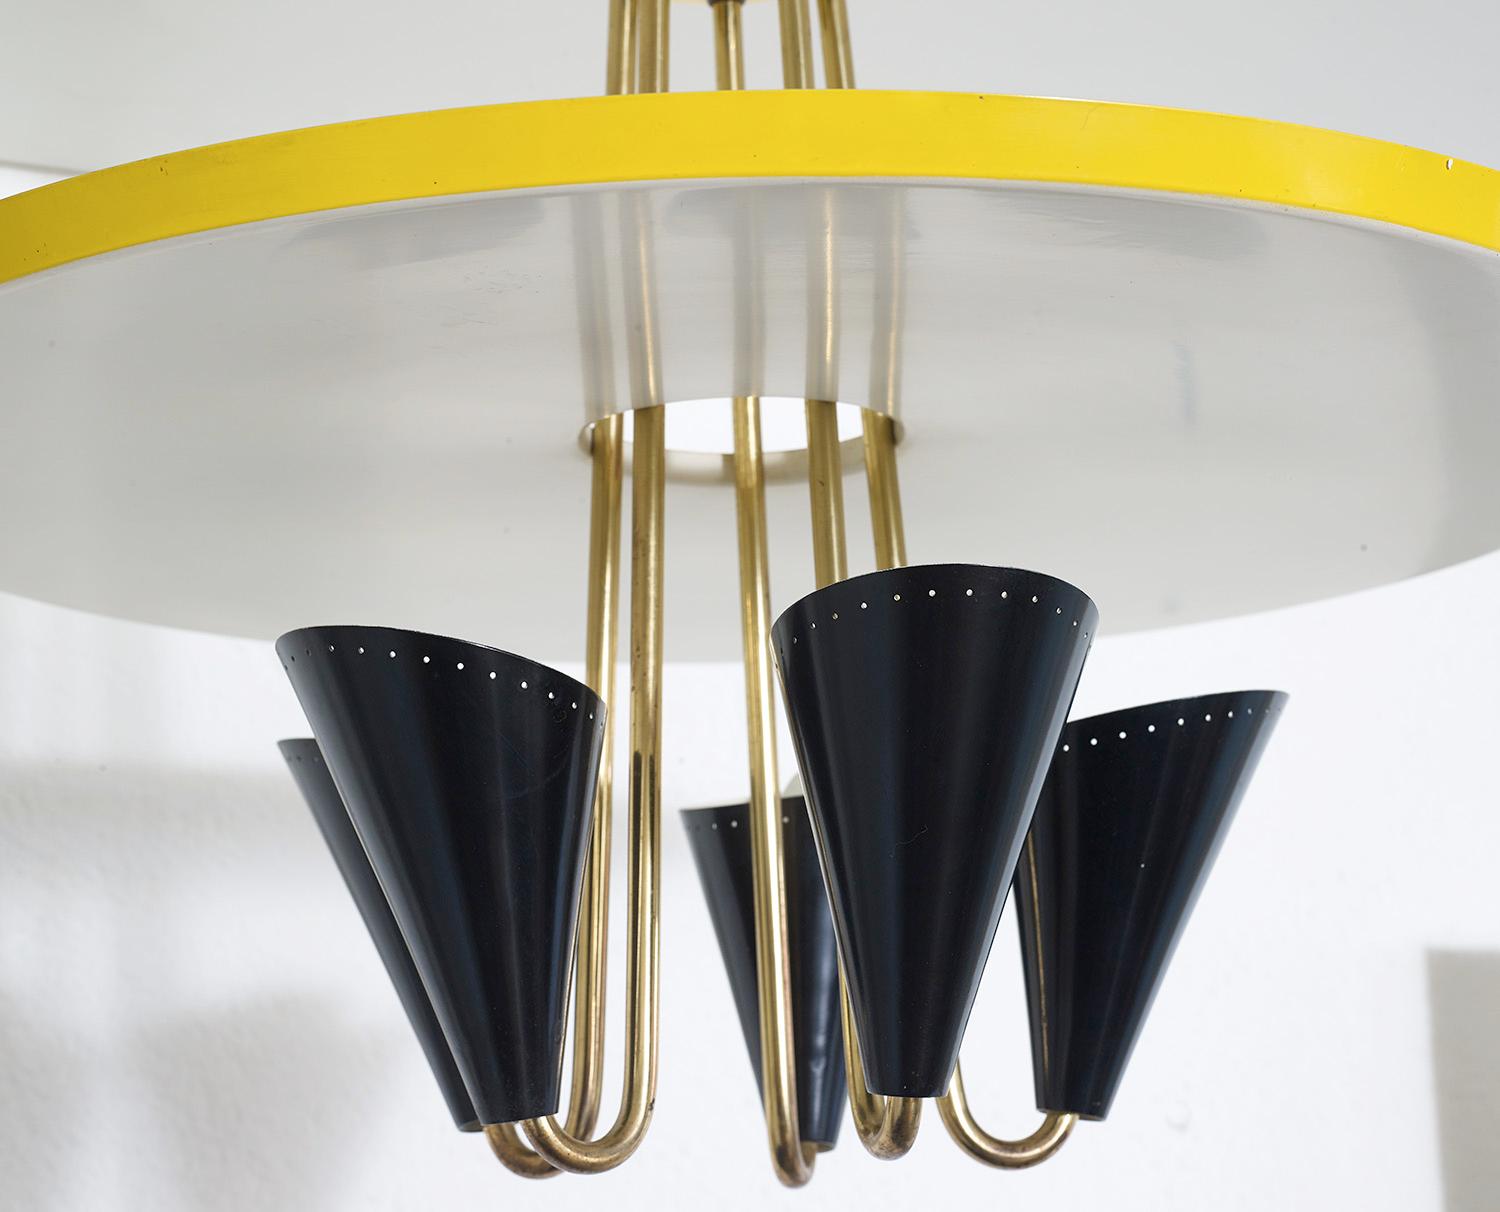 Ceiling light in lacquered metal and brass, BAG Turgi, Switzerland, 1950. 

BAG Turgi was a Swiss lighting manufacturer who produced among others also lamps under license for Stilnovo and even Arteluce. BAG Turgi was one of the most innovative